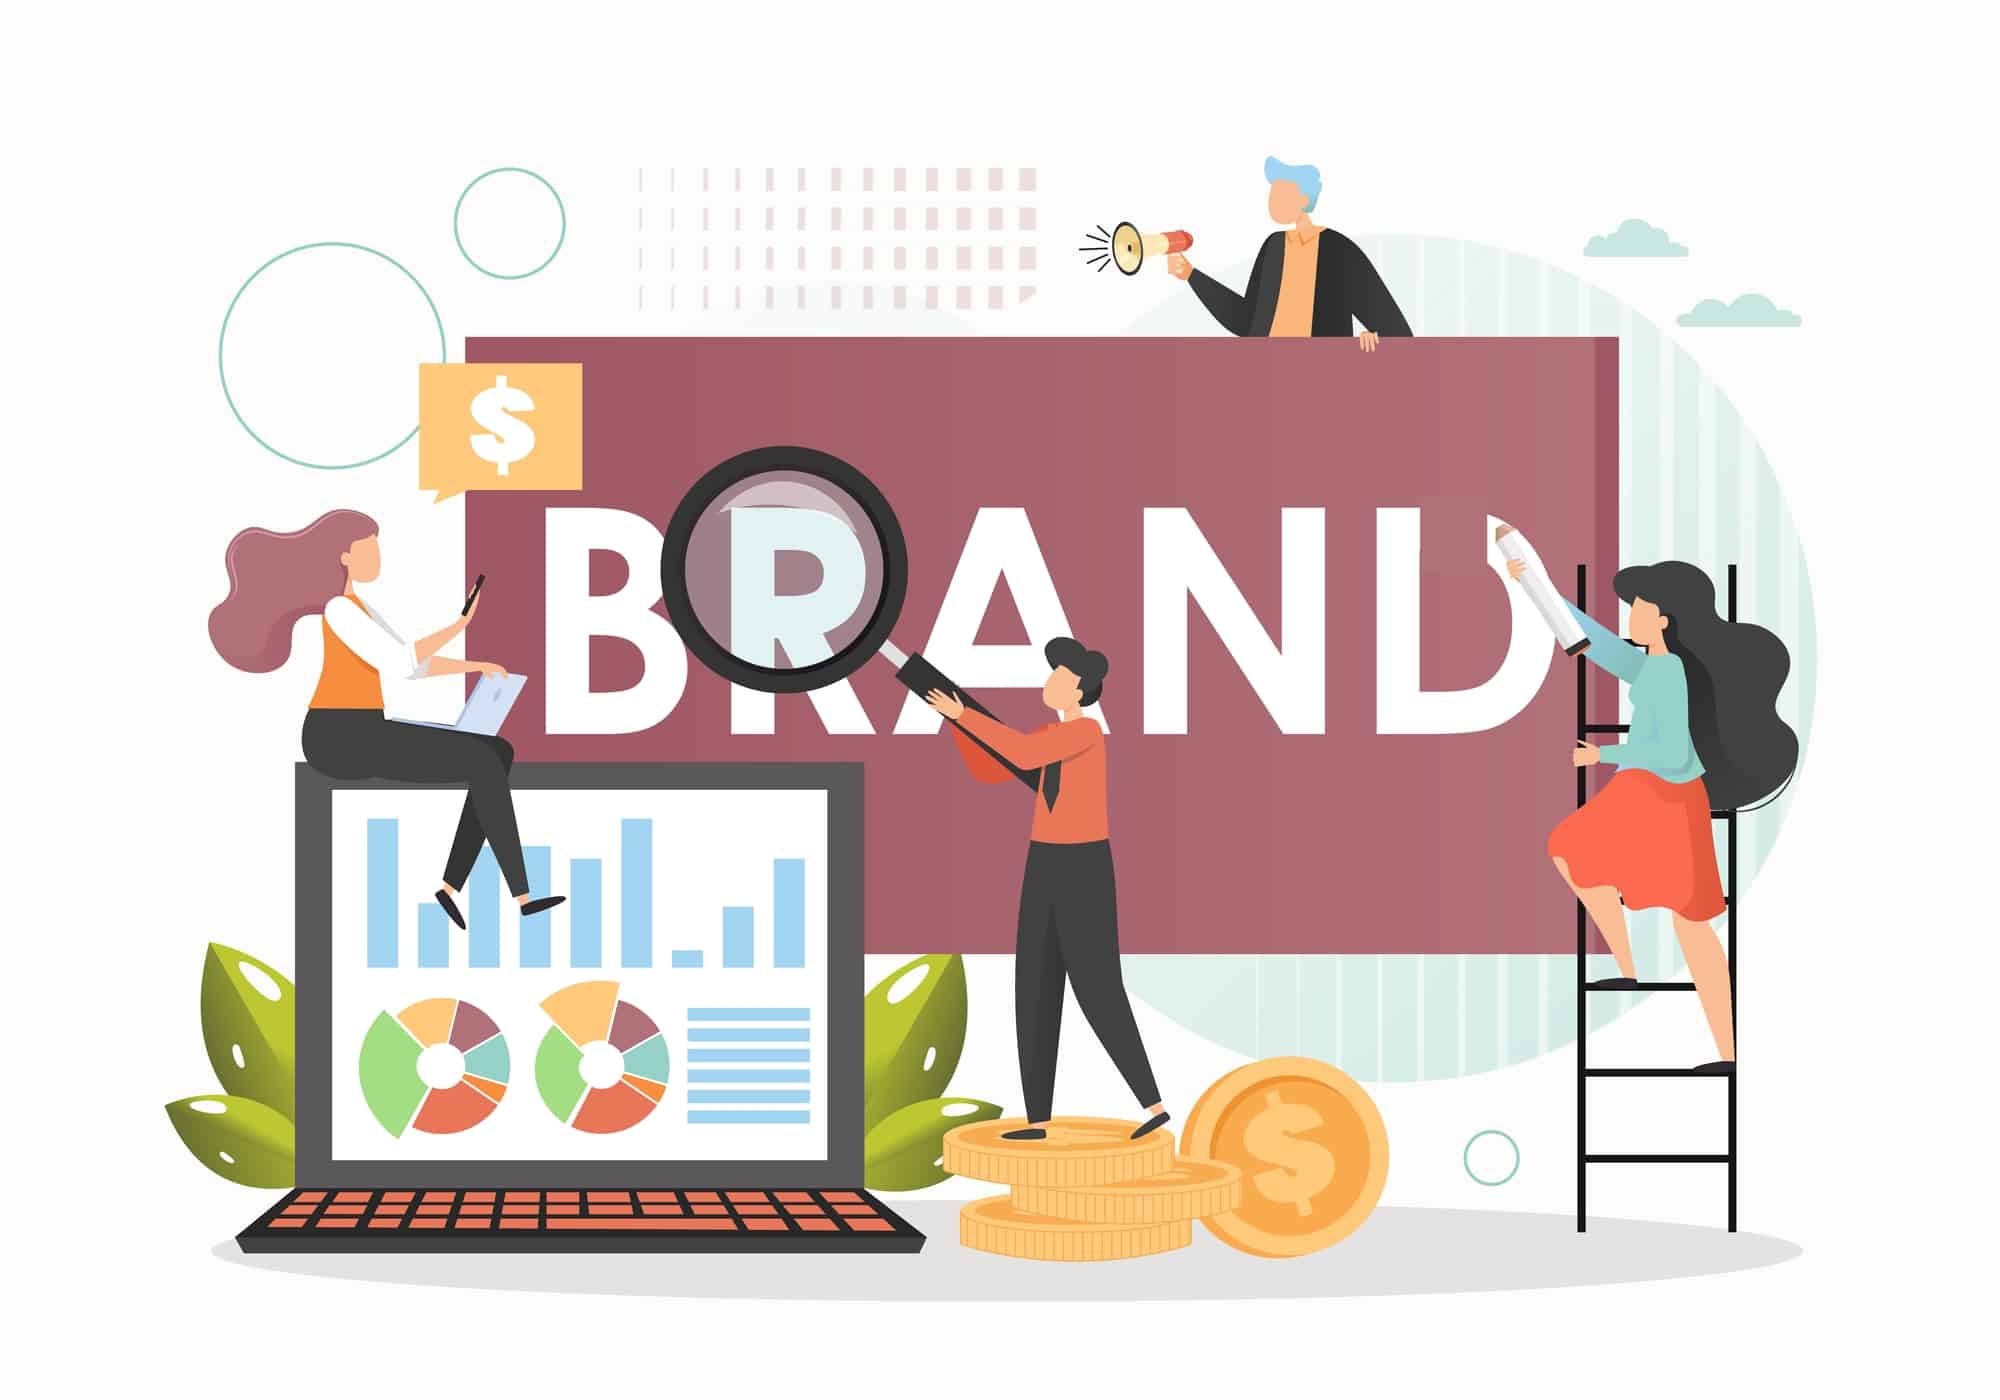 Marketing specialists male and female characters creating new company brand, improving brand awareness or recognition, vector flat illustration. Branding campaign, business marketing strategy.